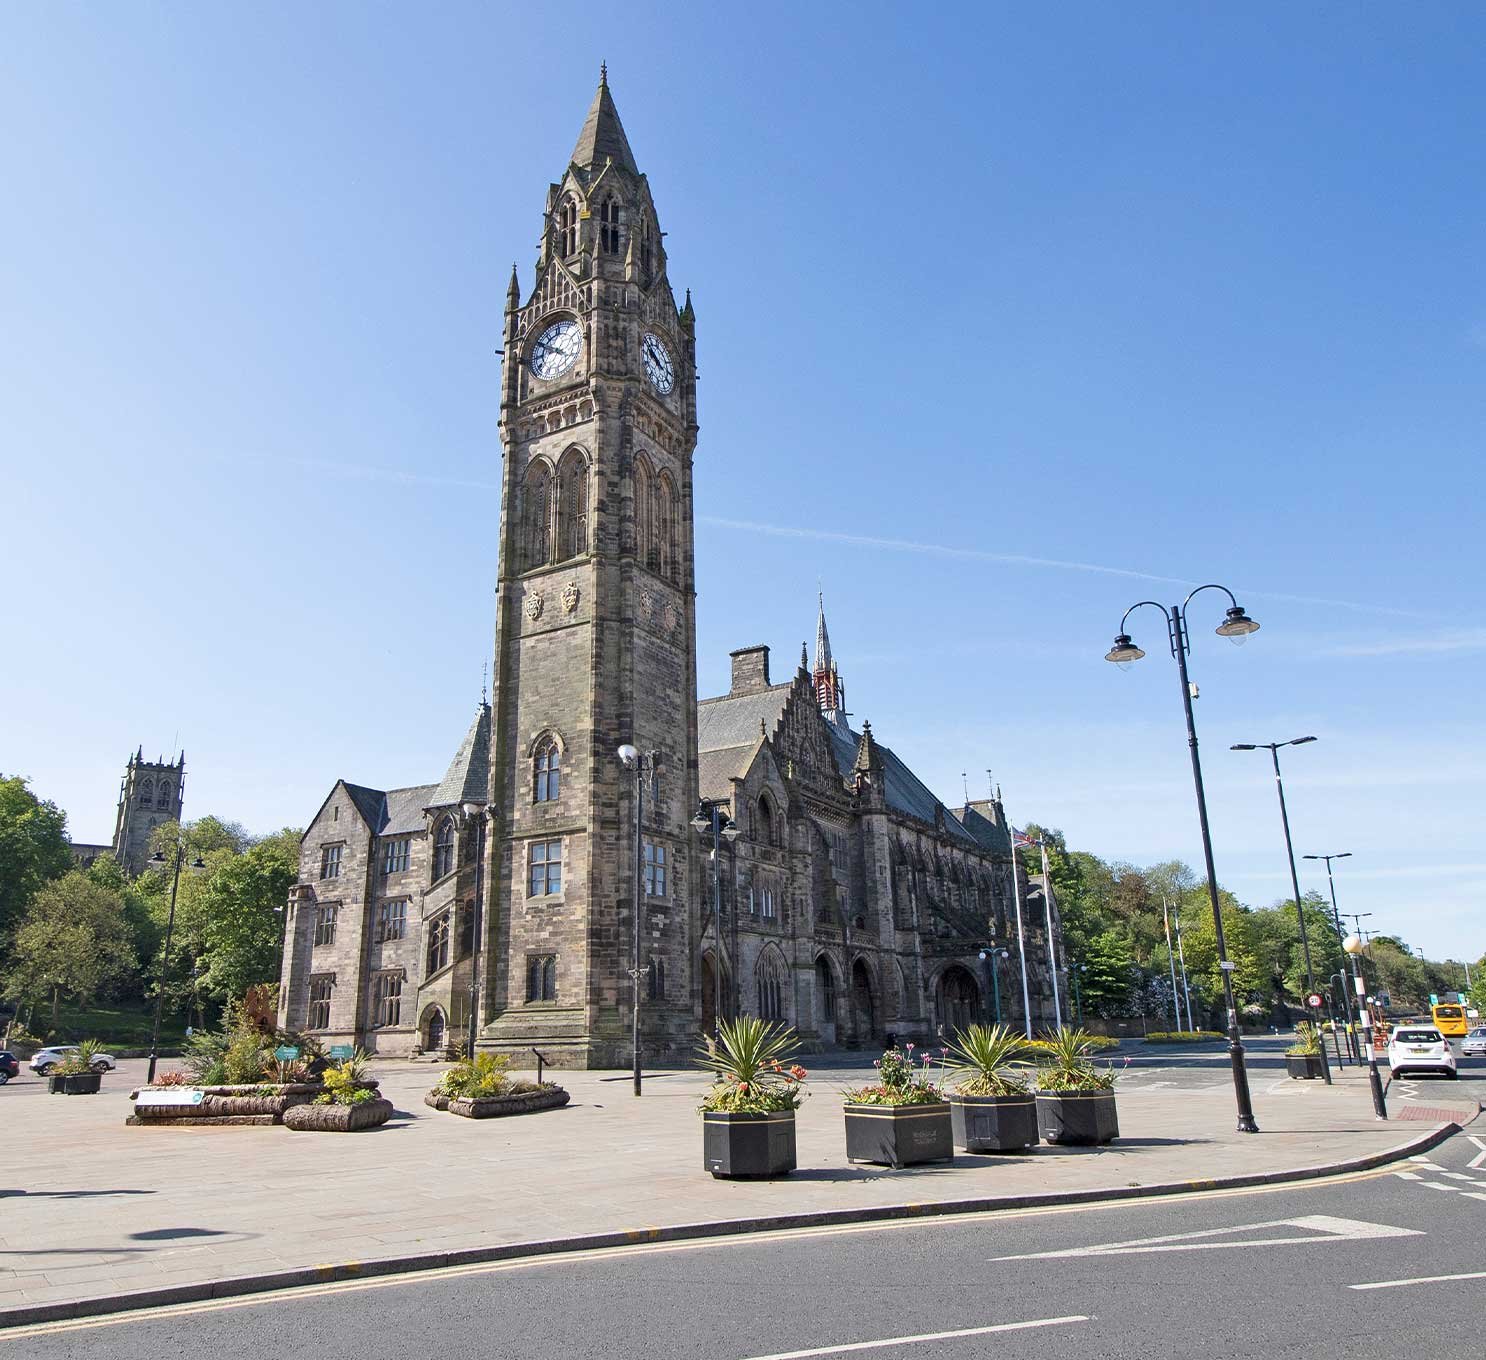 View of the Rochdale Town Hall and clocktower in the centre of Rochdale on a bright sunny morning